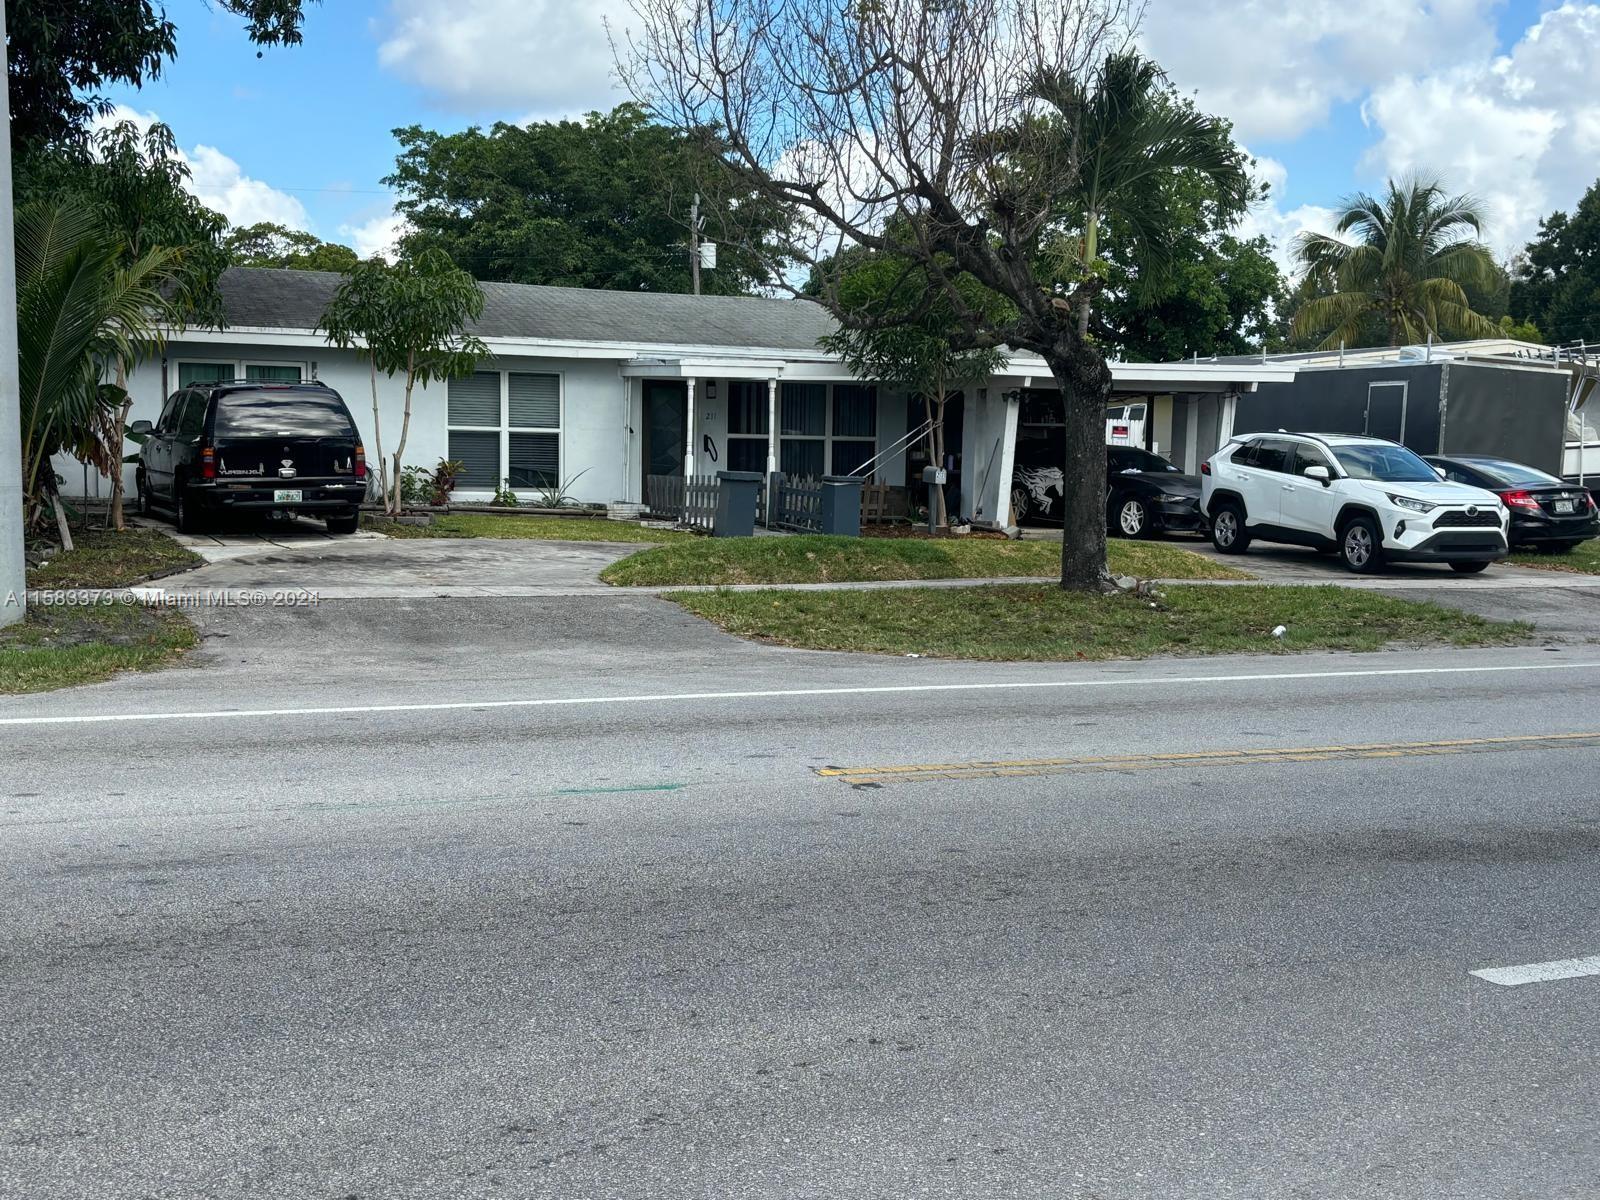 Property for Sale at Address Not Disclosed, Fort Lauderdale, Broward County, Florida - Bedrooms: 5 
Bathrooms: 3  - $725,000